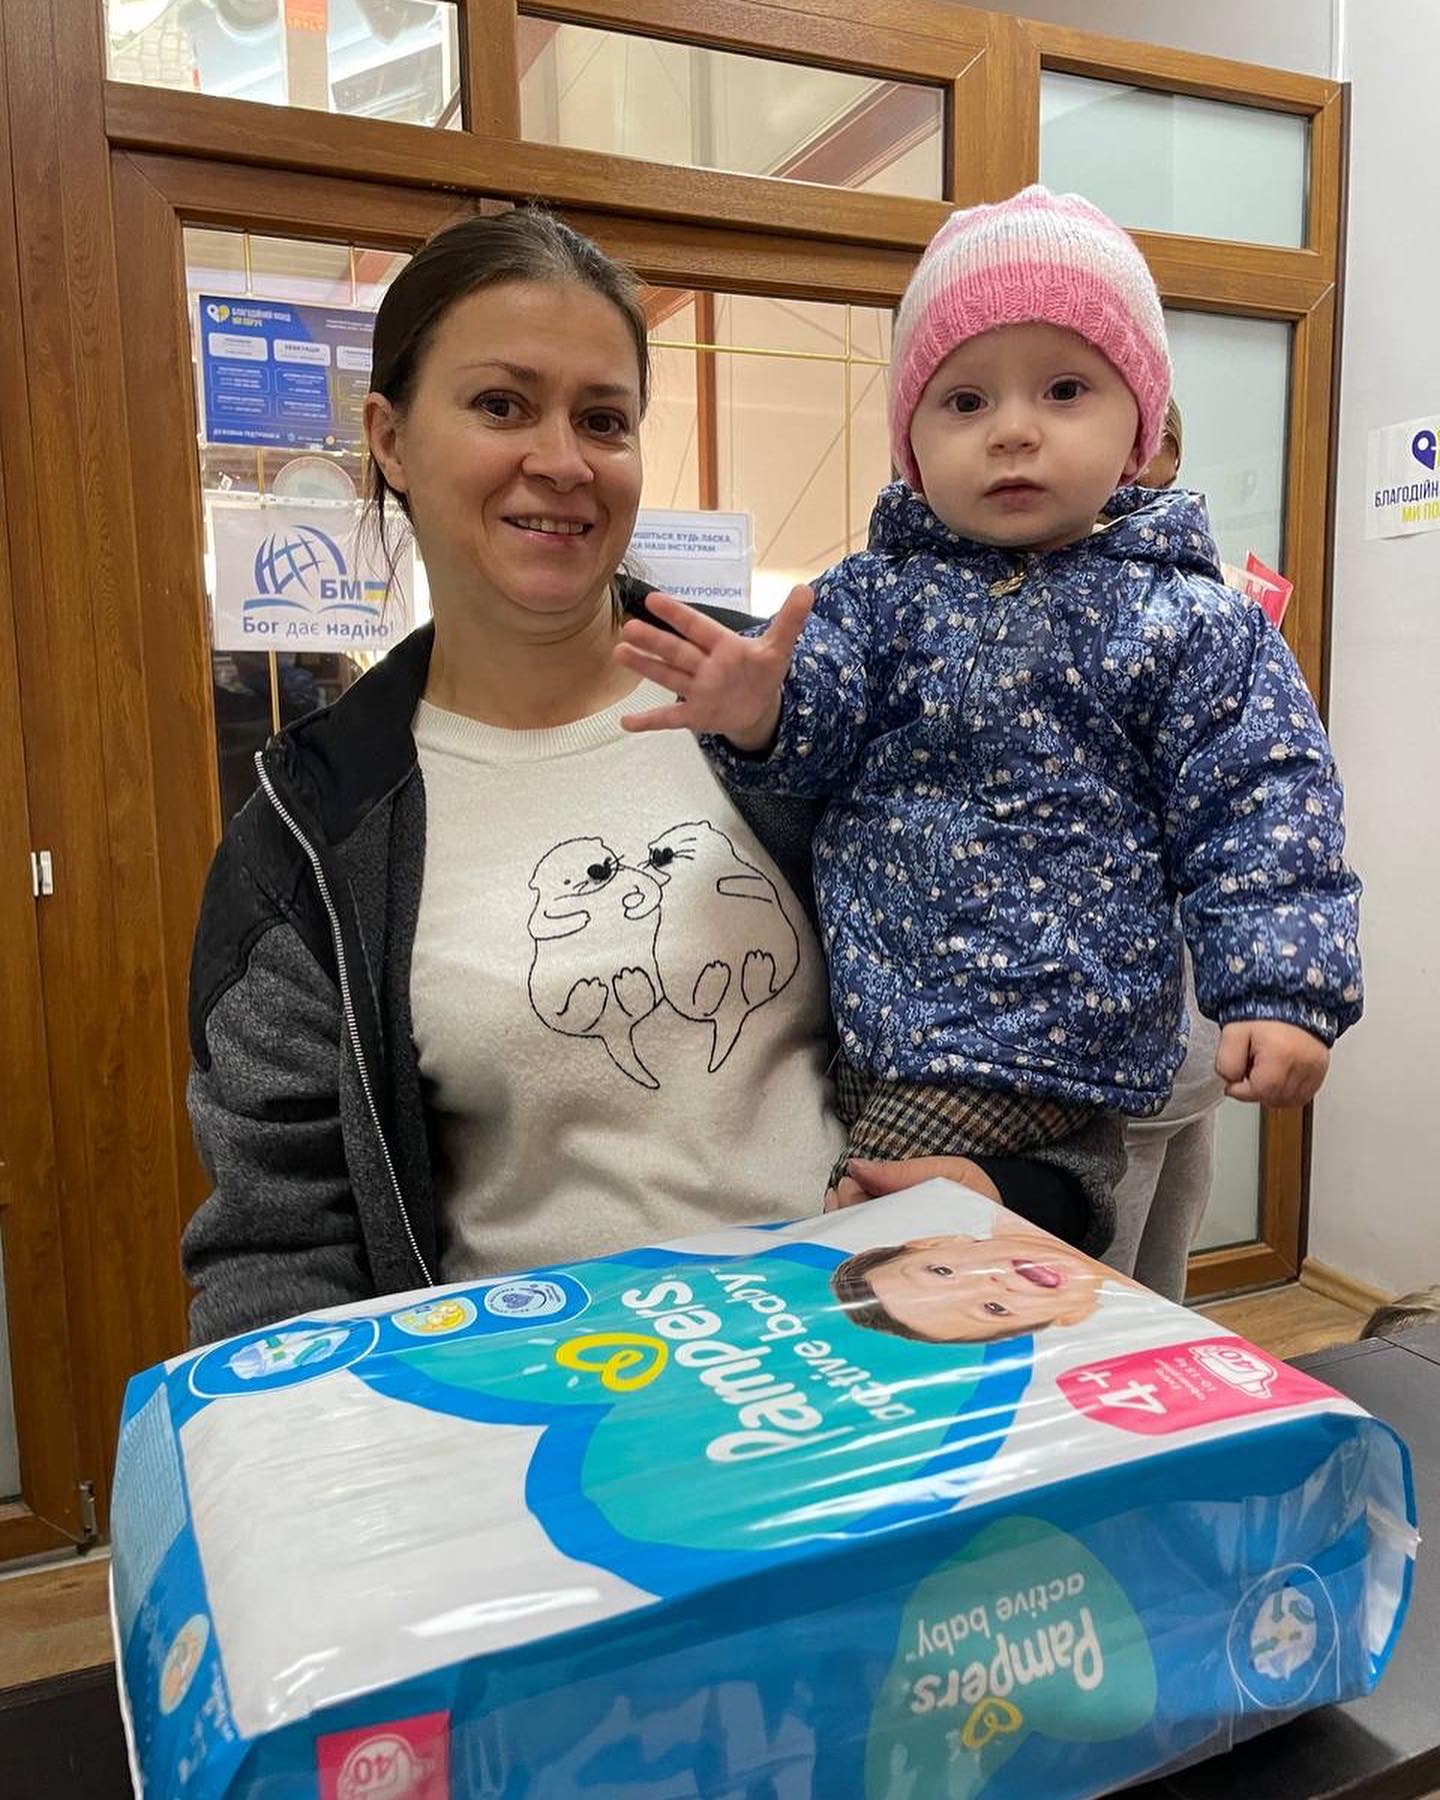 A woman holding a baby next to a box of diapers.